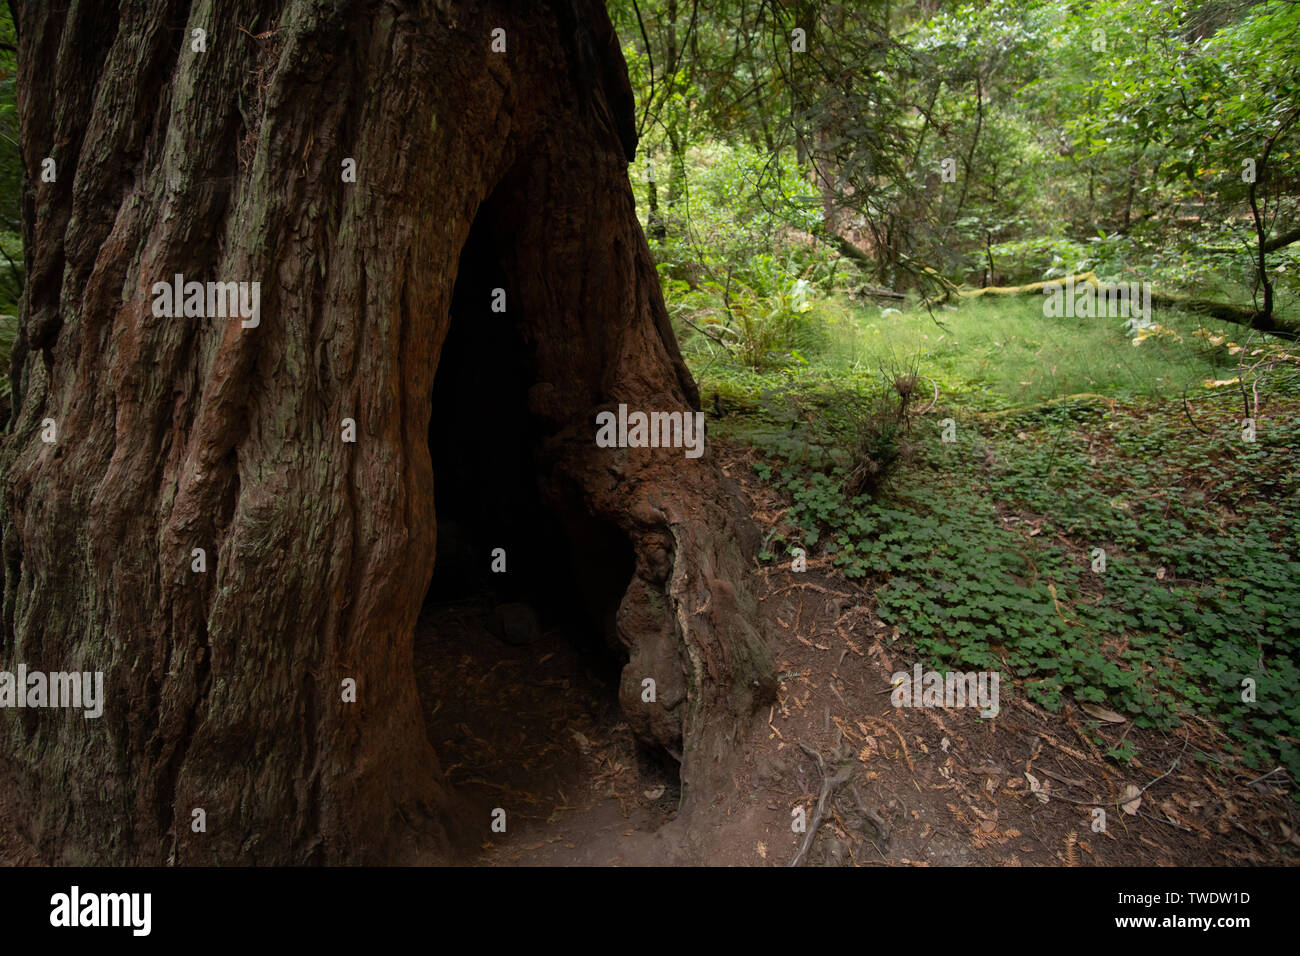 A detailed look at Redwood Tree hollowed out stump in Muir Woods National Park. Muir Woods is located north of San Francisco in Mill Valley, CA. Stock Photo